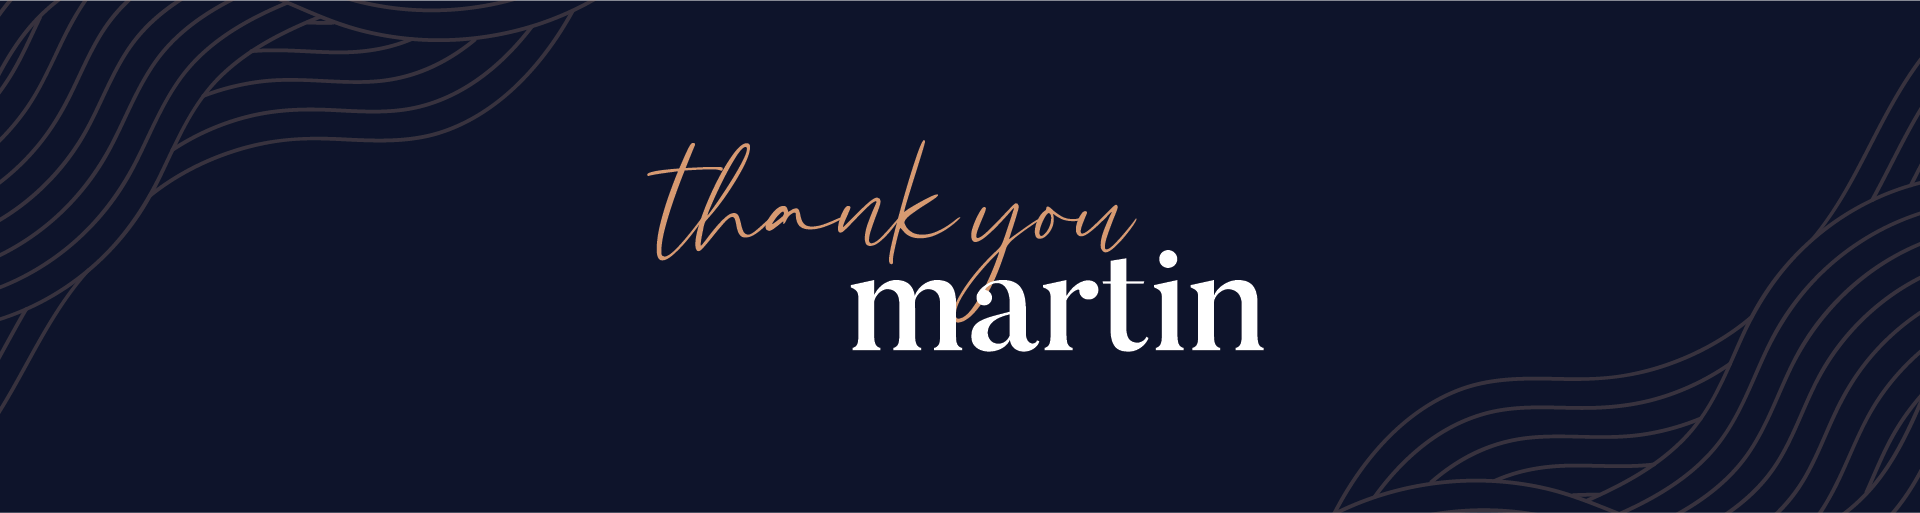 martin-thank-you-banner.png